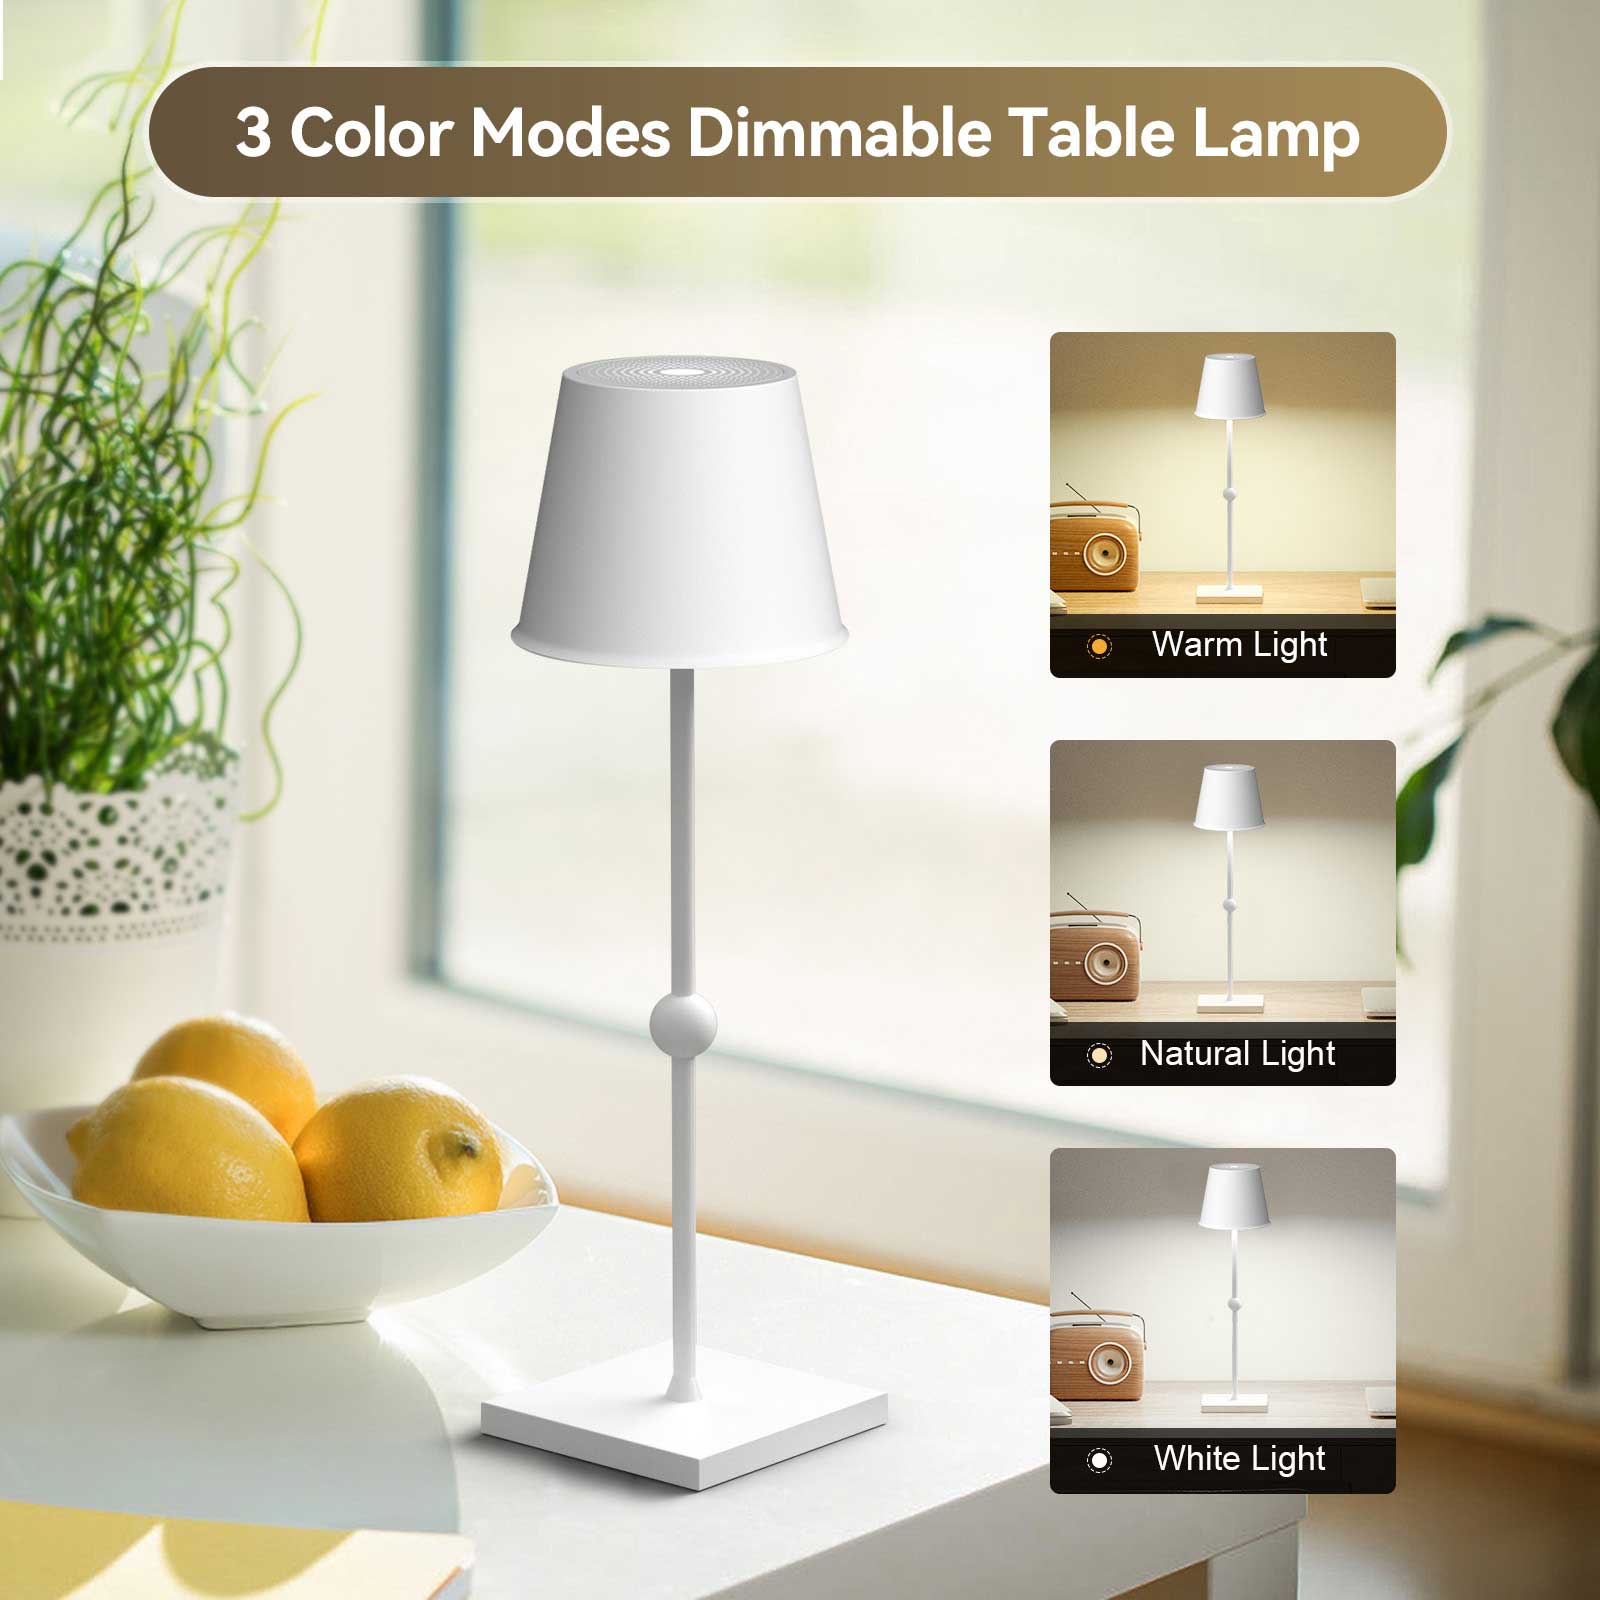 Huiveoo 3 Color Modes Dimmable Table Lamp Silva-A white